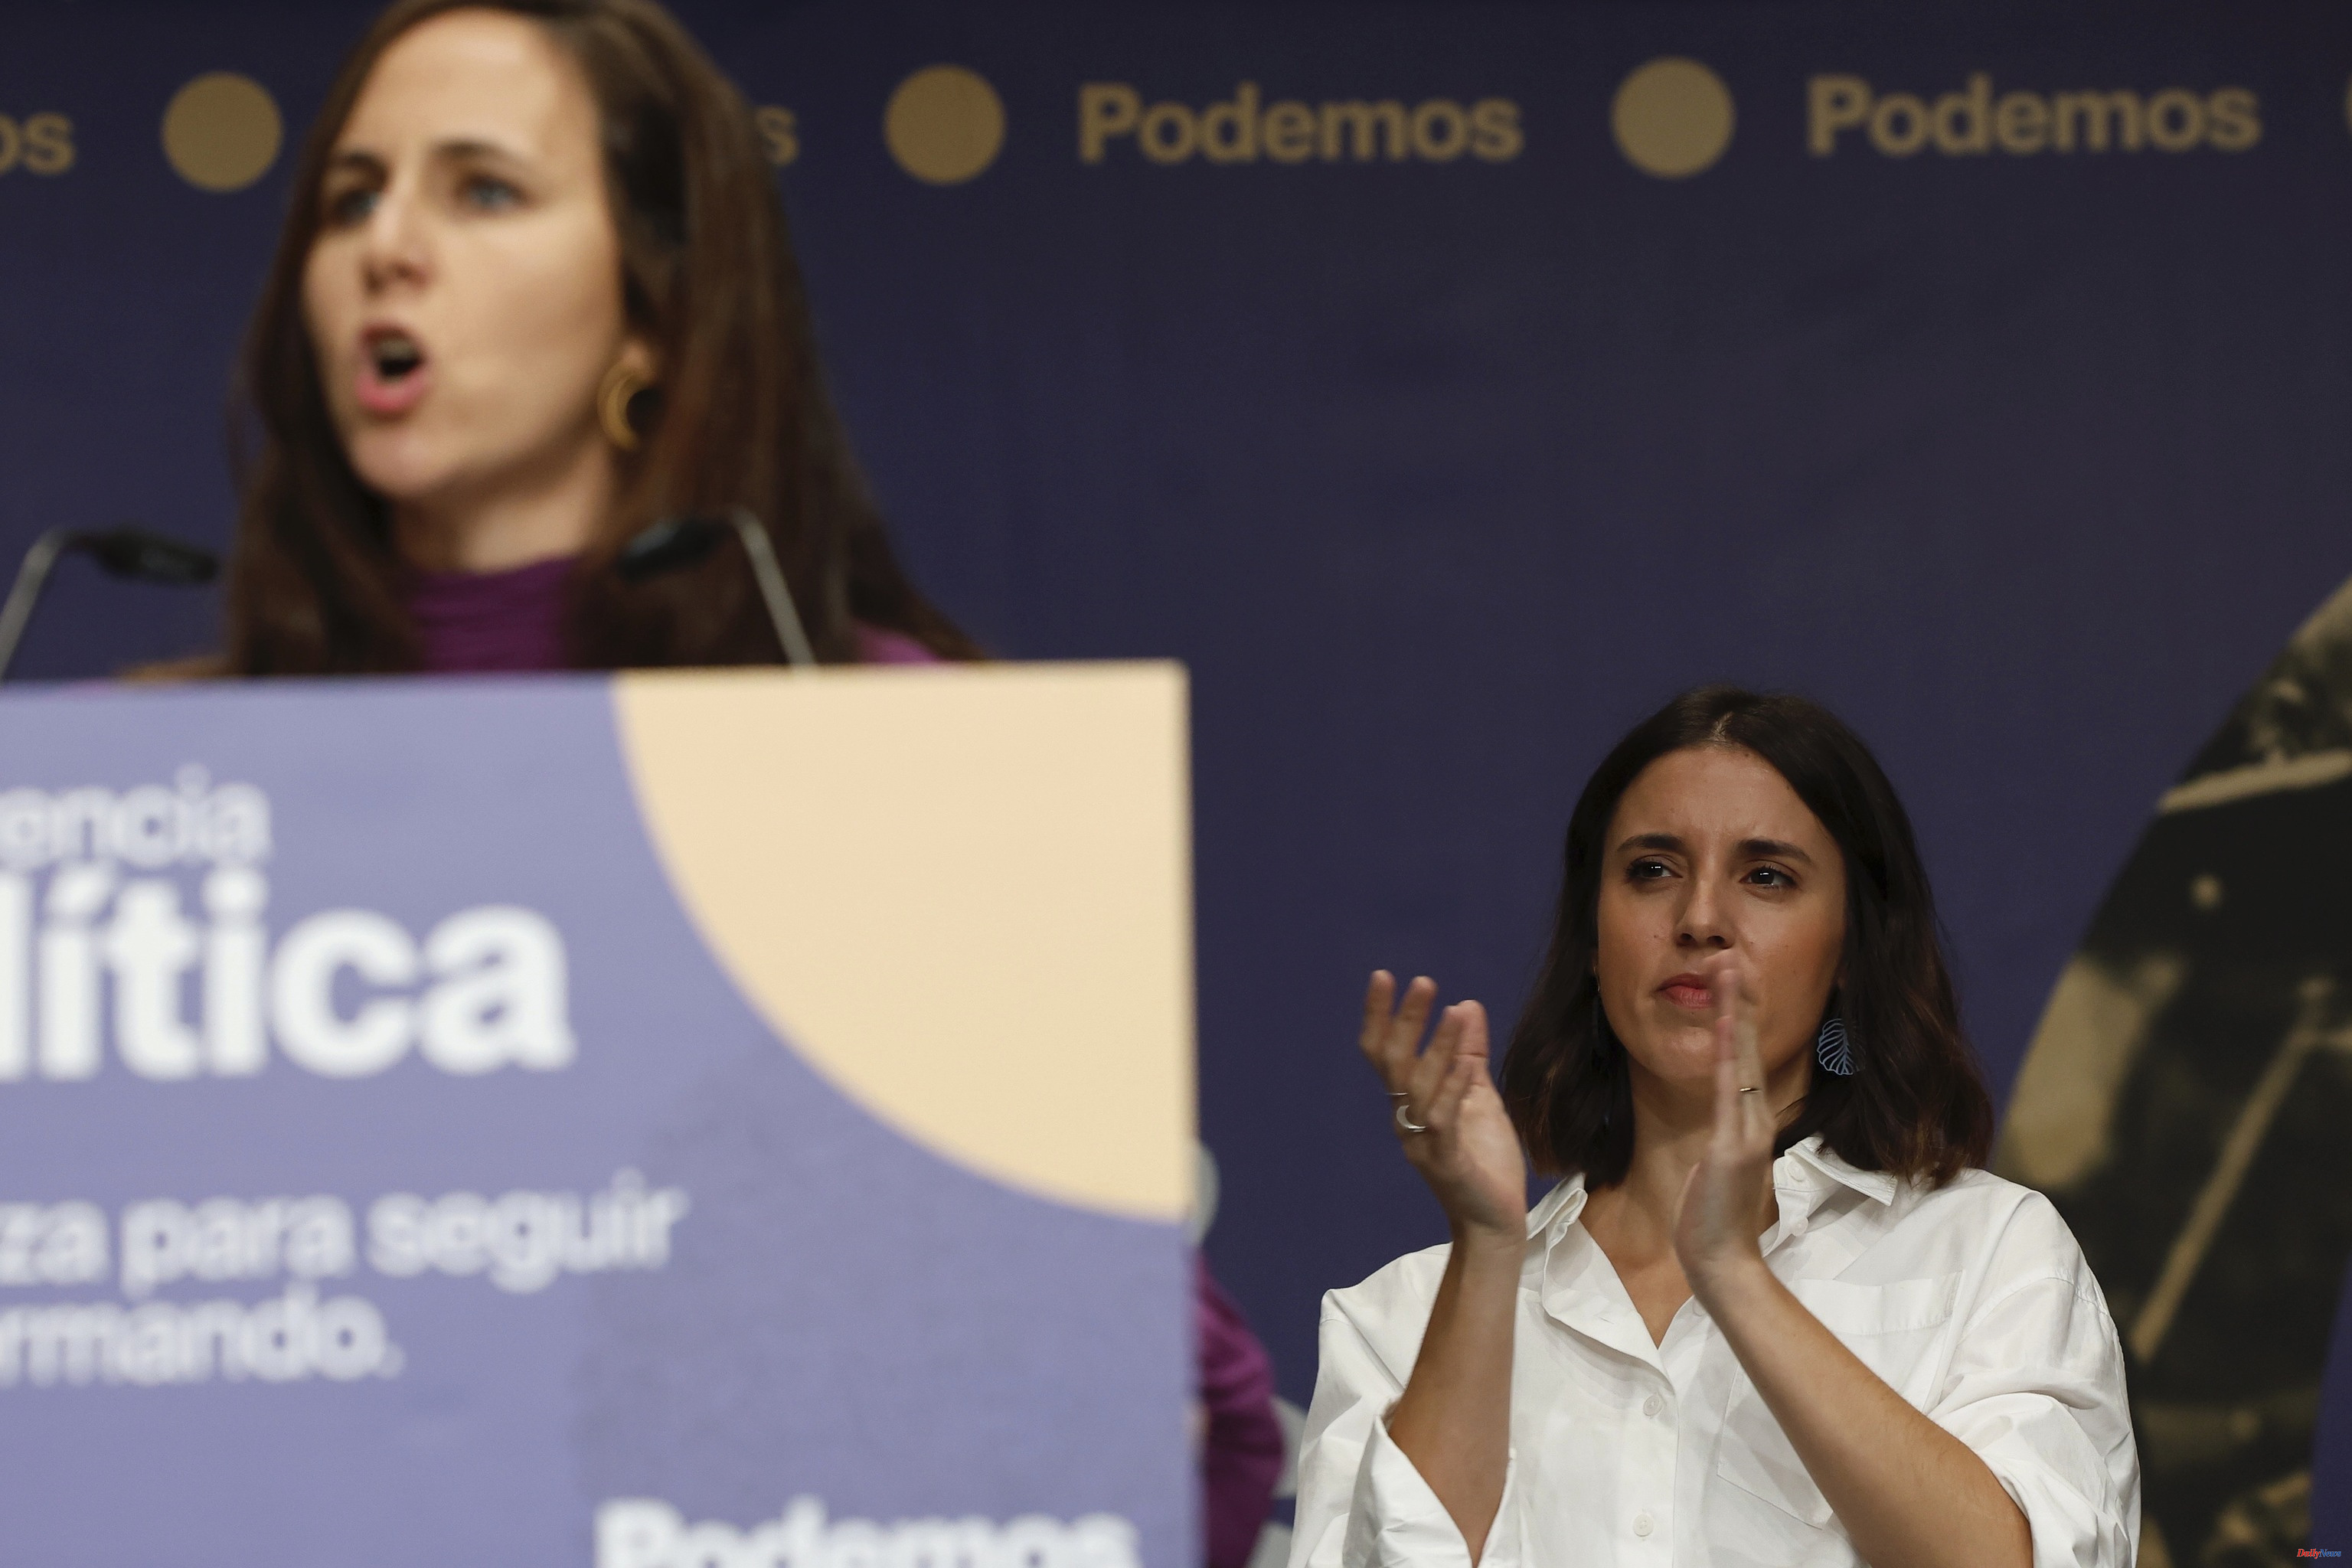 Politics Podemos rearms against Sumar: "We have stopped the operation in its tracks to replace us with a servile left"